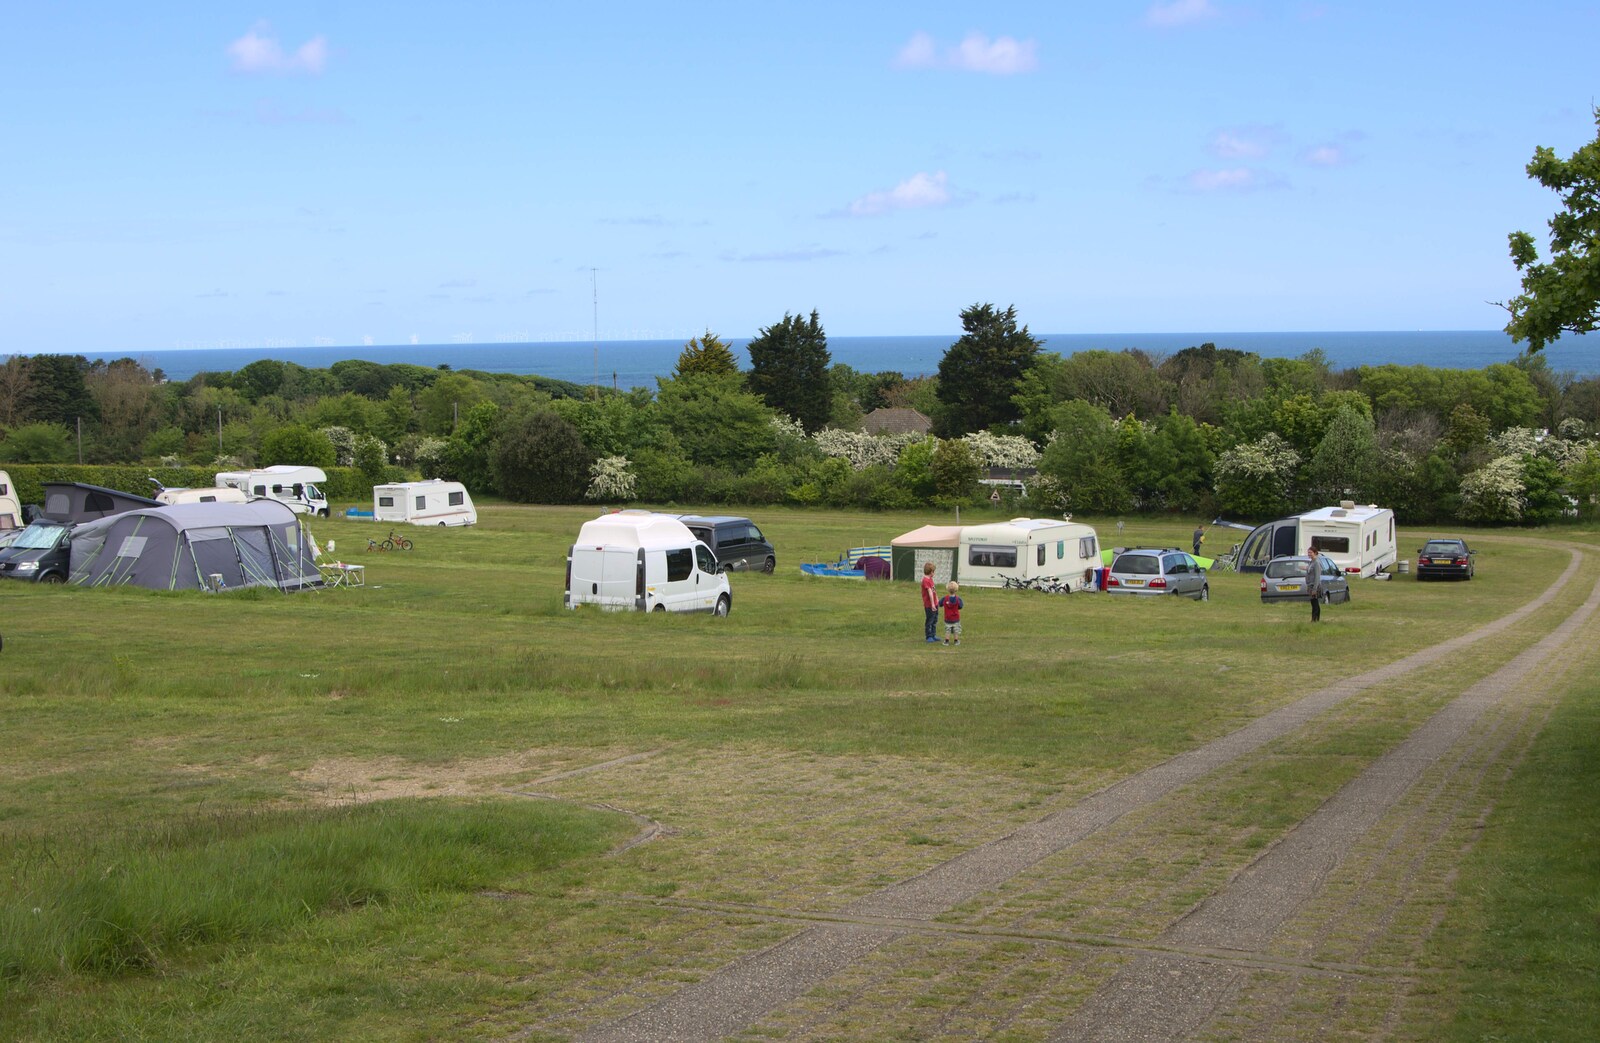 A final view over the campsite and the deep blue sea from A Birthday Camping Trip, East Runton, North Norfolk - 26th May 2015